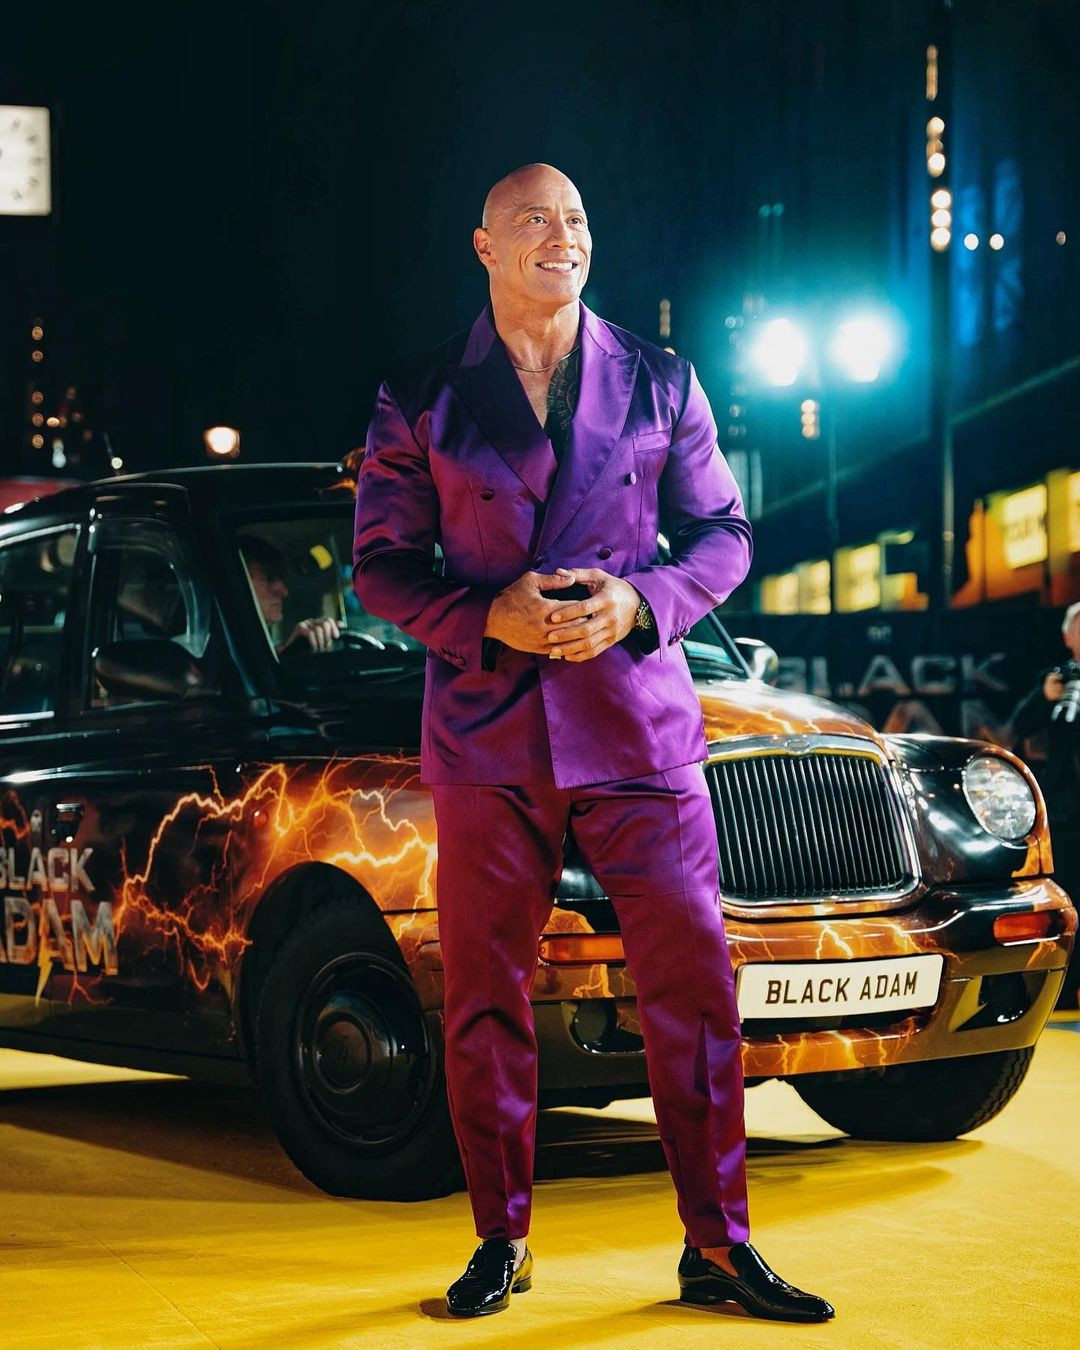 bao the rock revealed his past of being shunned and depressed to becoming a billion dollar superstar and owning assets that many people dream of 6516d726b0872 The Rock Revealed His Past Of Being Shunned And Depressed To Becoming A Billion-dollar Superstar And Owning Assets That Many People Dream Of